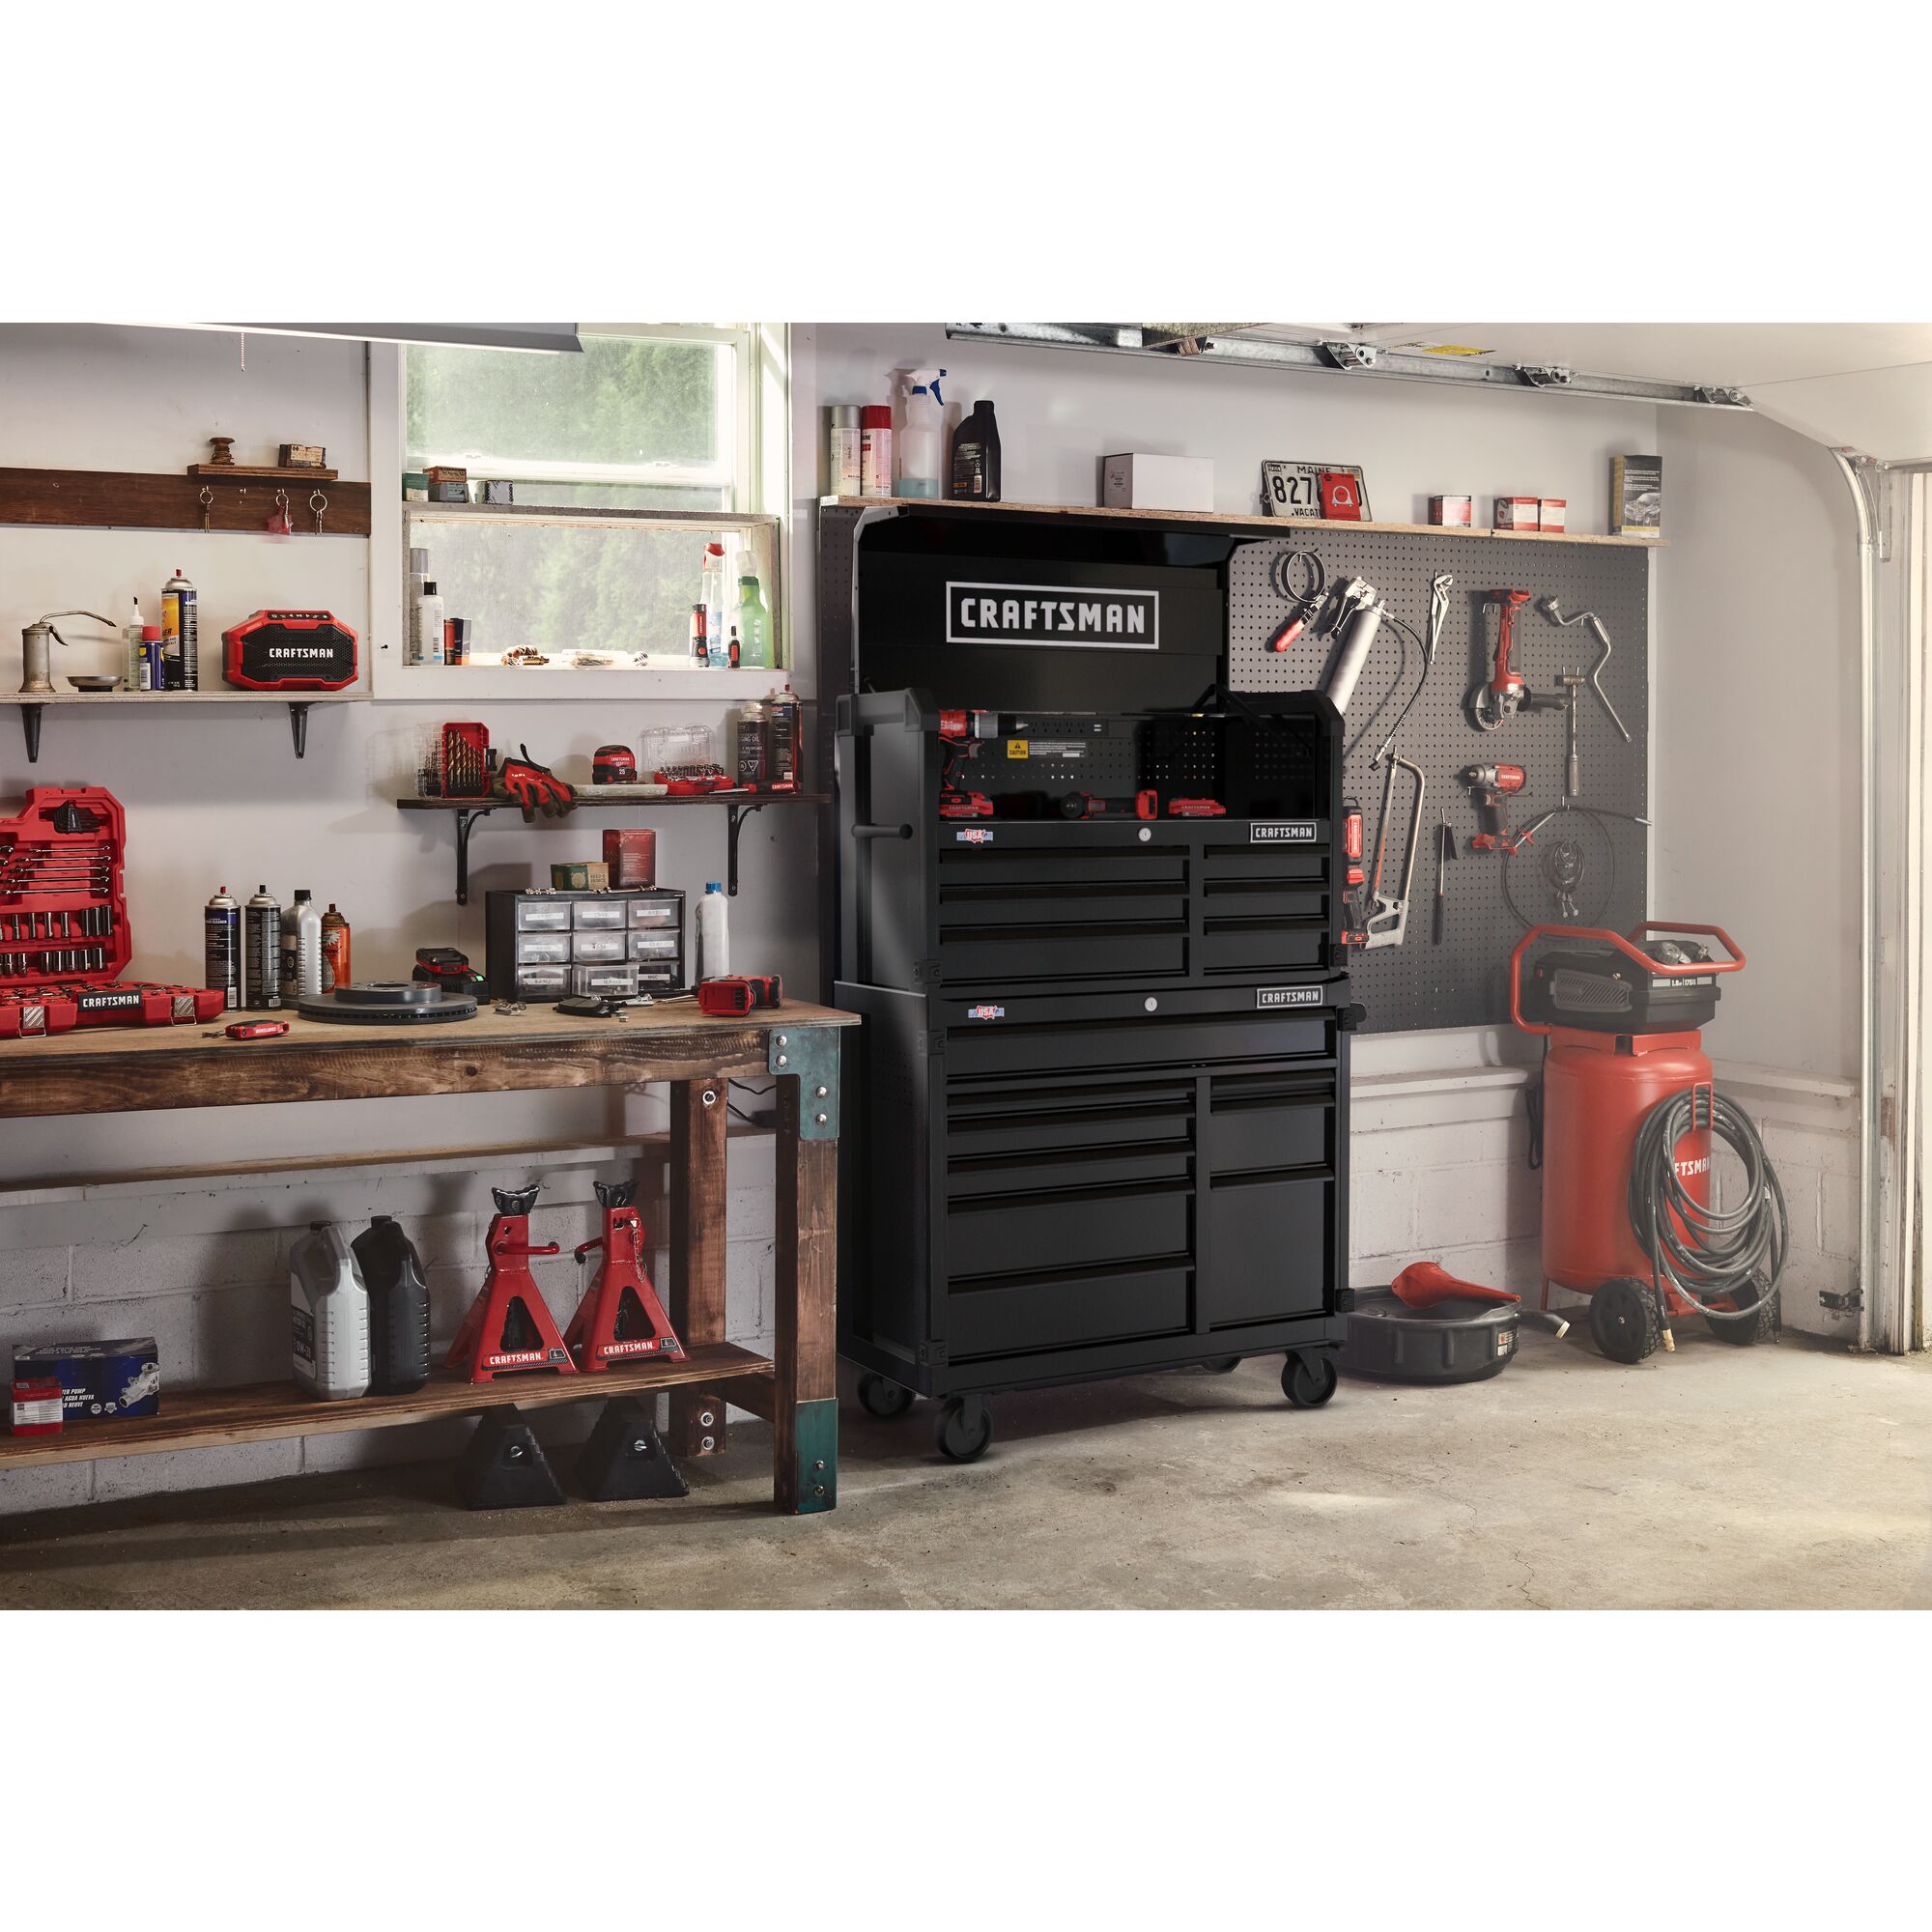 Black CRAFTSMAN Premium S2000 Series 41-inch wide Metal Tool Storage Cabinet and chest stacked on top of each other in a residential garage setting, surrounded by other CRAFTSMAN tools.